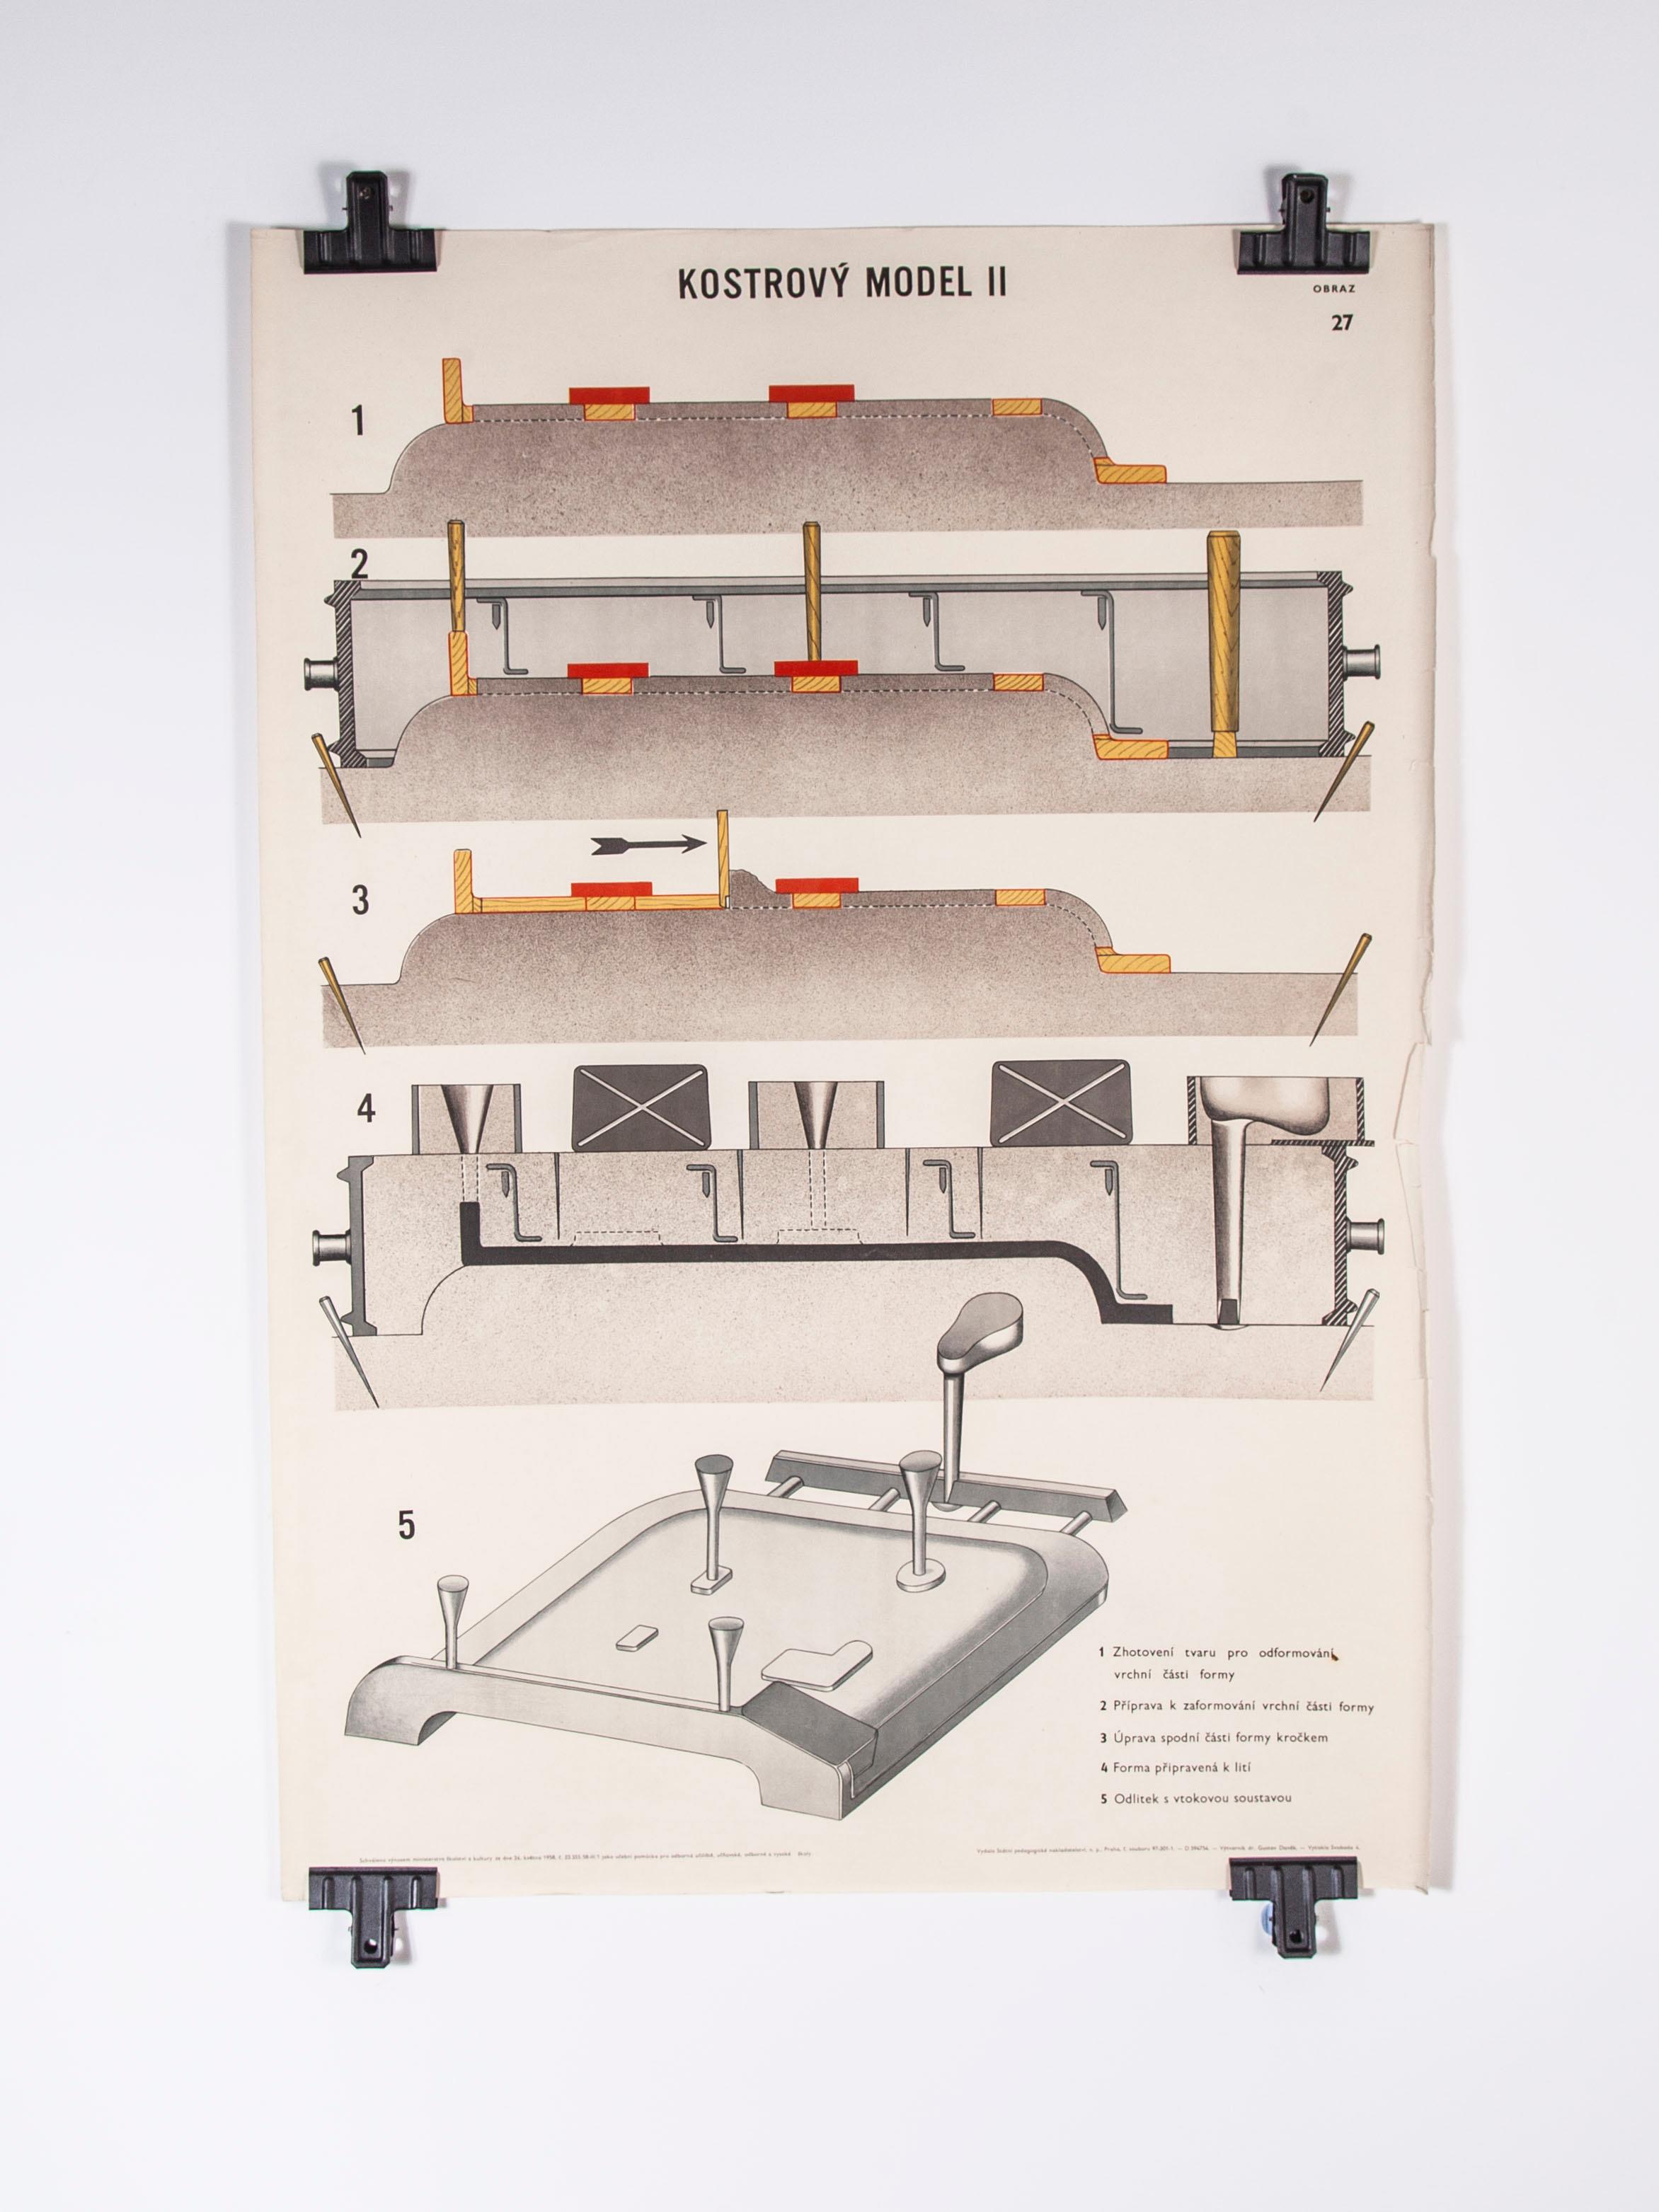 Czech technical industrial drawing – foundry mould engineering poster – 28

Sourced from an old engineering workshop in the Czech Republic, an amazing series of technical industrial drawings explaining the process of sand casting and creating the